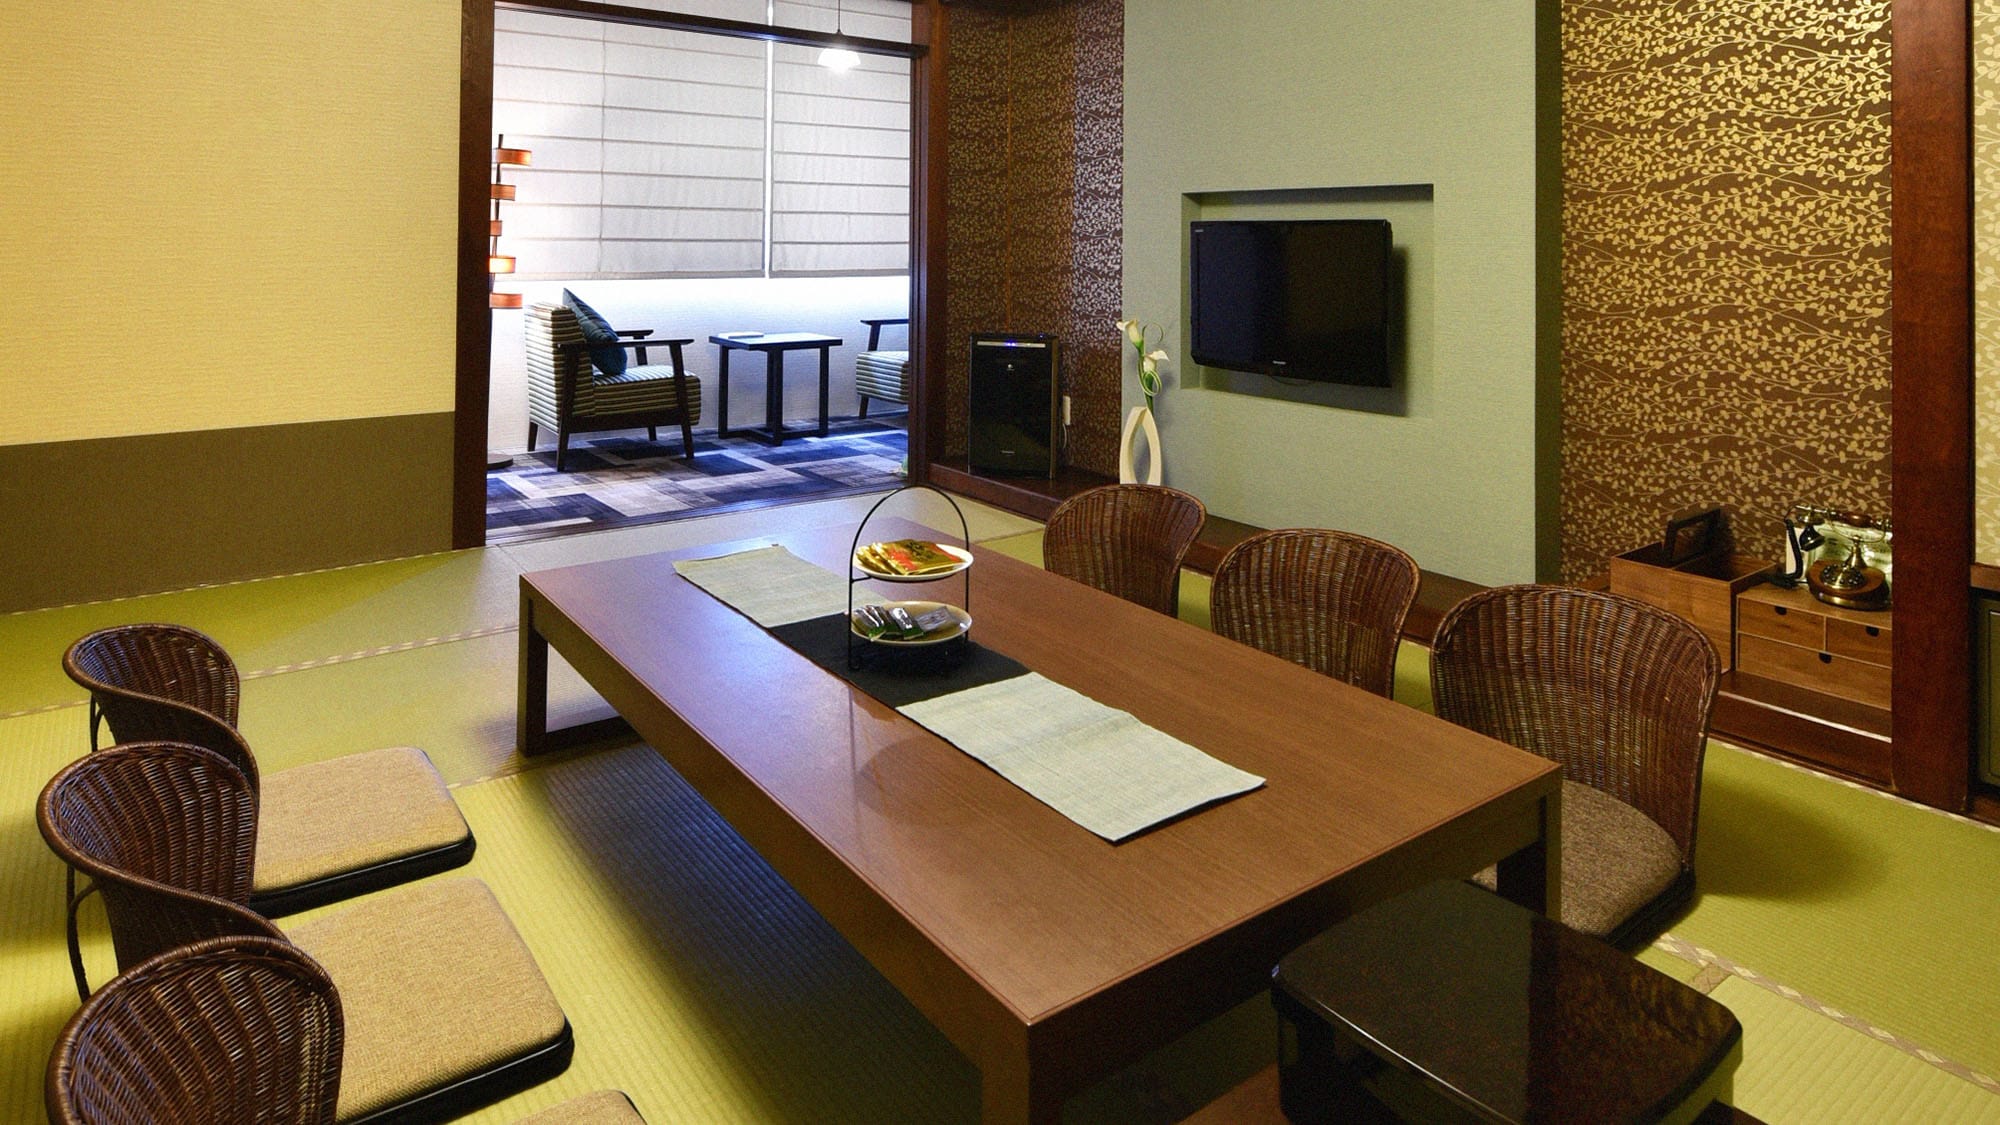 ・ [Example of general guest room] Japanese-style room with 8 to 12 tatami mats. The size and view cannot be specified